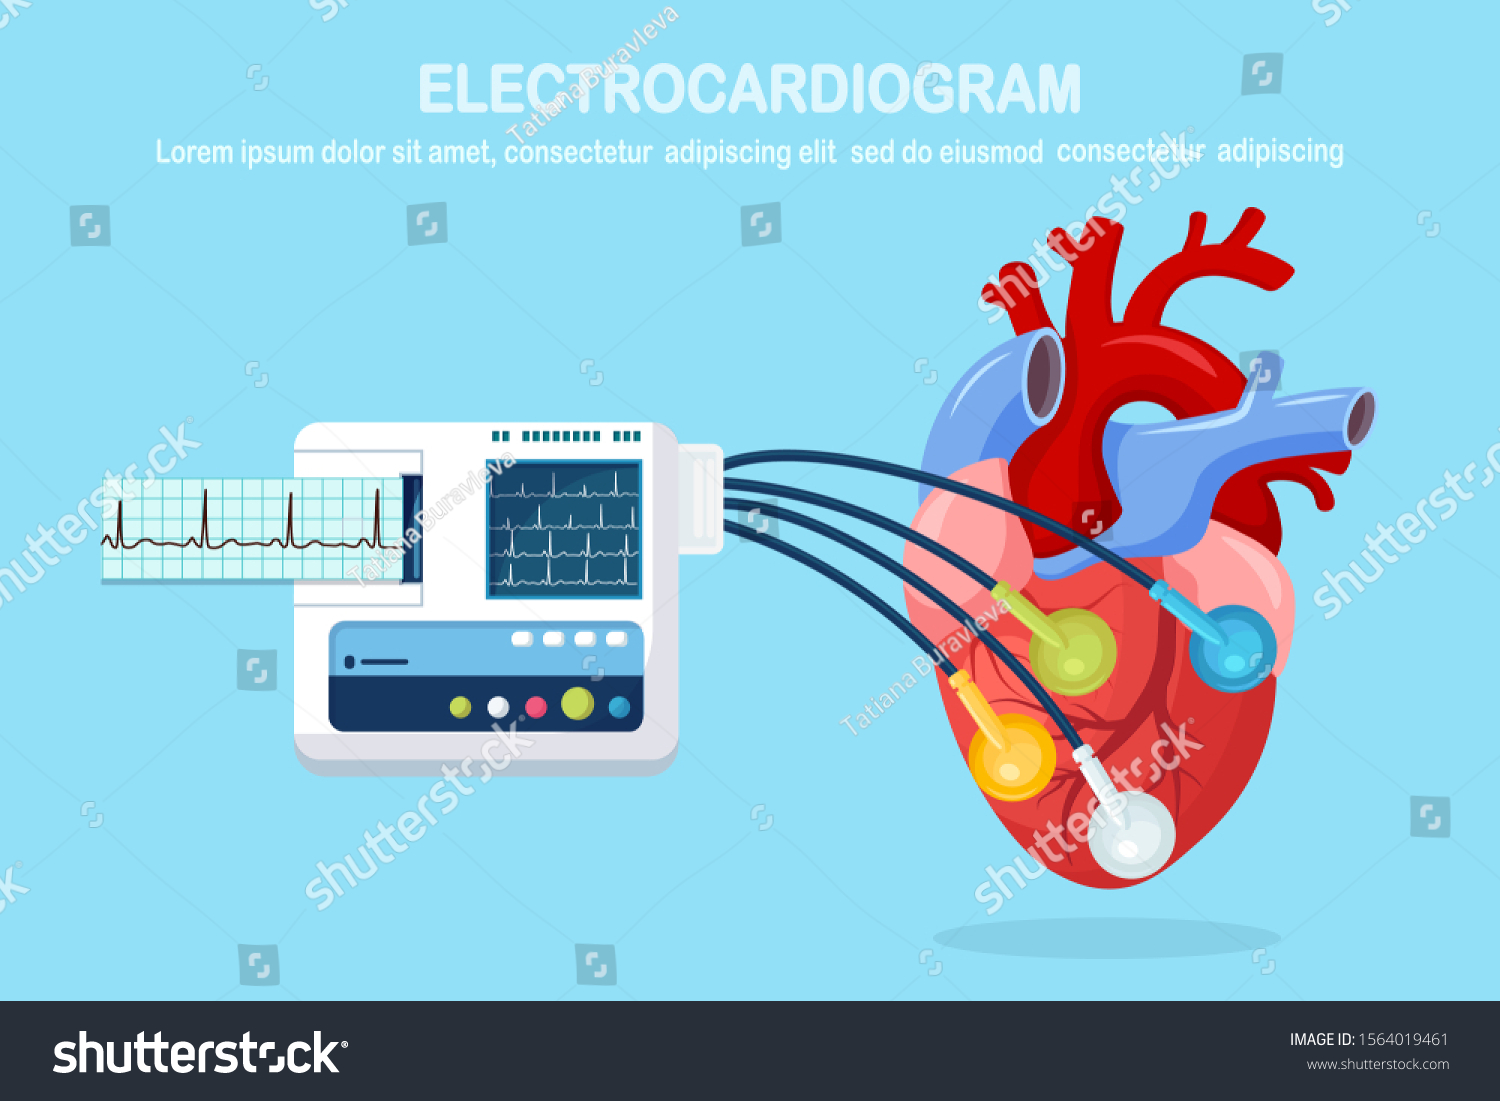 ECG machine isolated on background. Electrocardiogram monitor for diagnosis human heart with EKG graph. Medical equipment for hospital with chart of heartbeat rhythm. Vector flat design  #1564019461